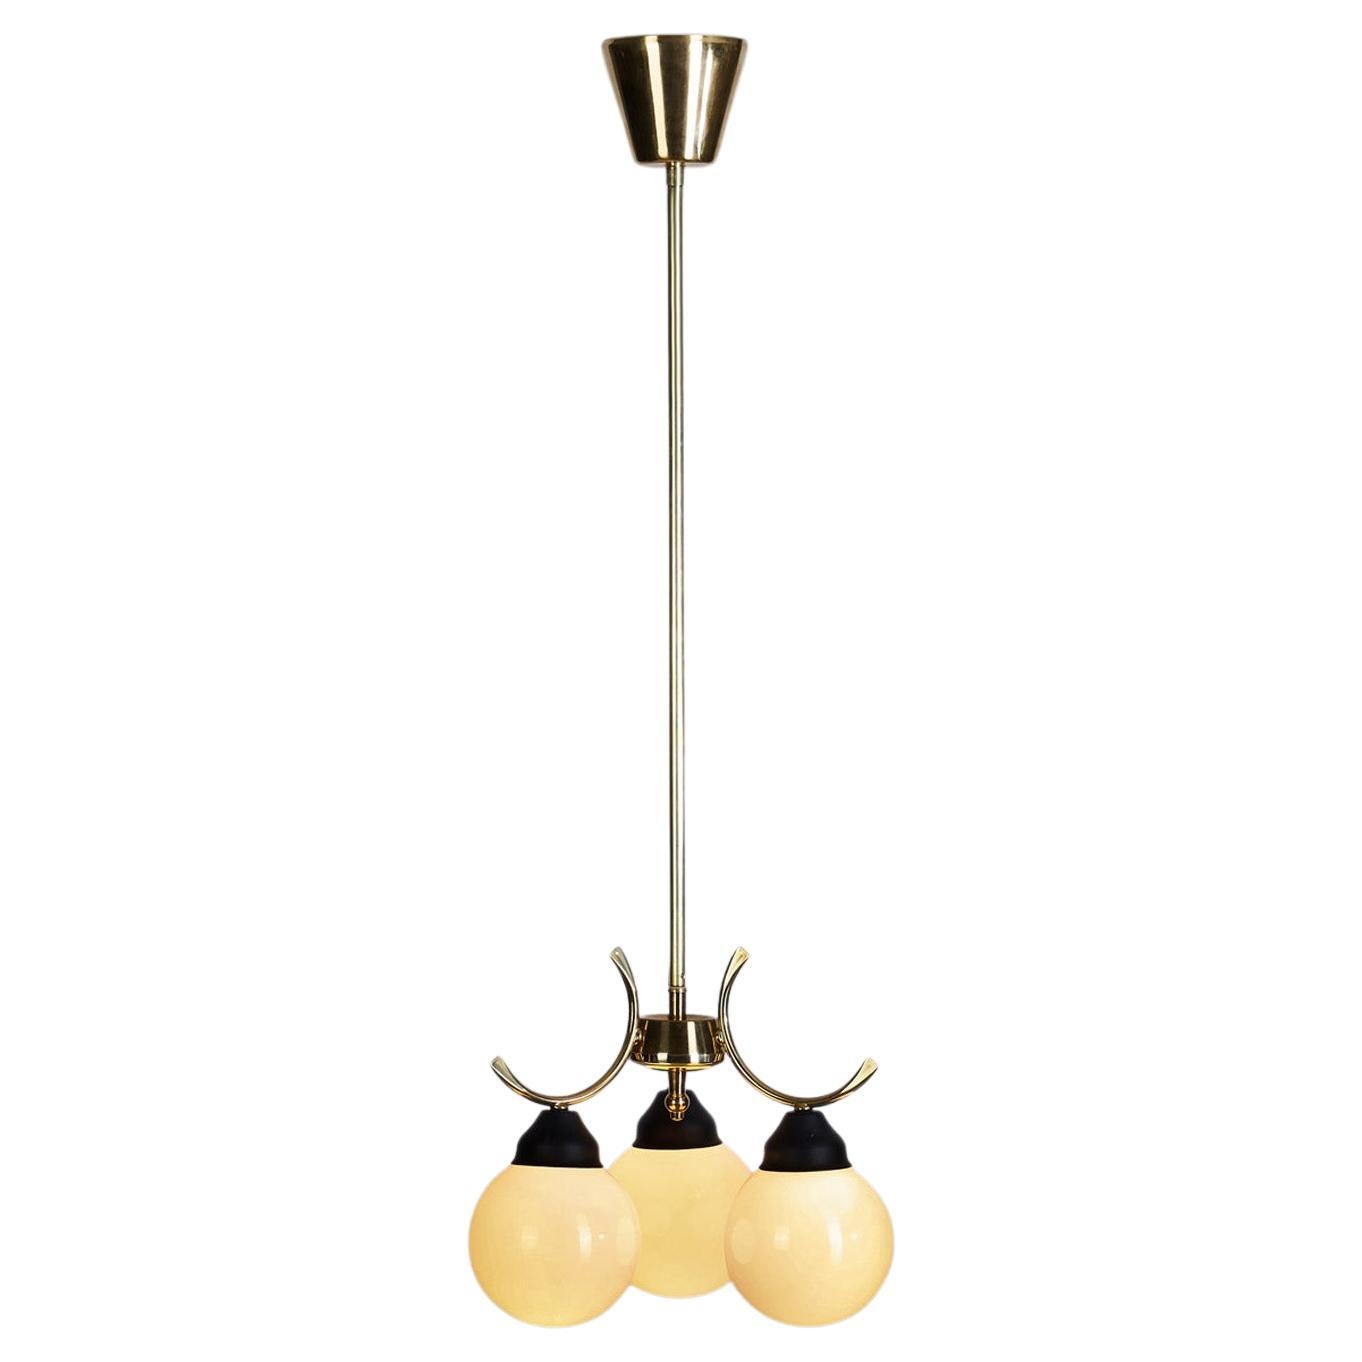 Mid-Century Modern Brass and Glass Ceiling Lamp, Europe, circa 1950s